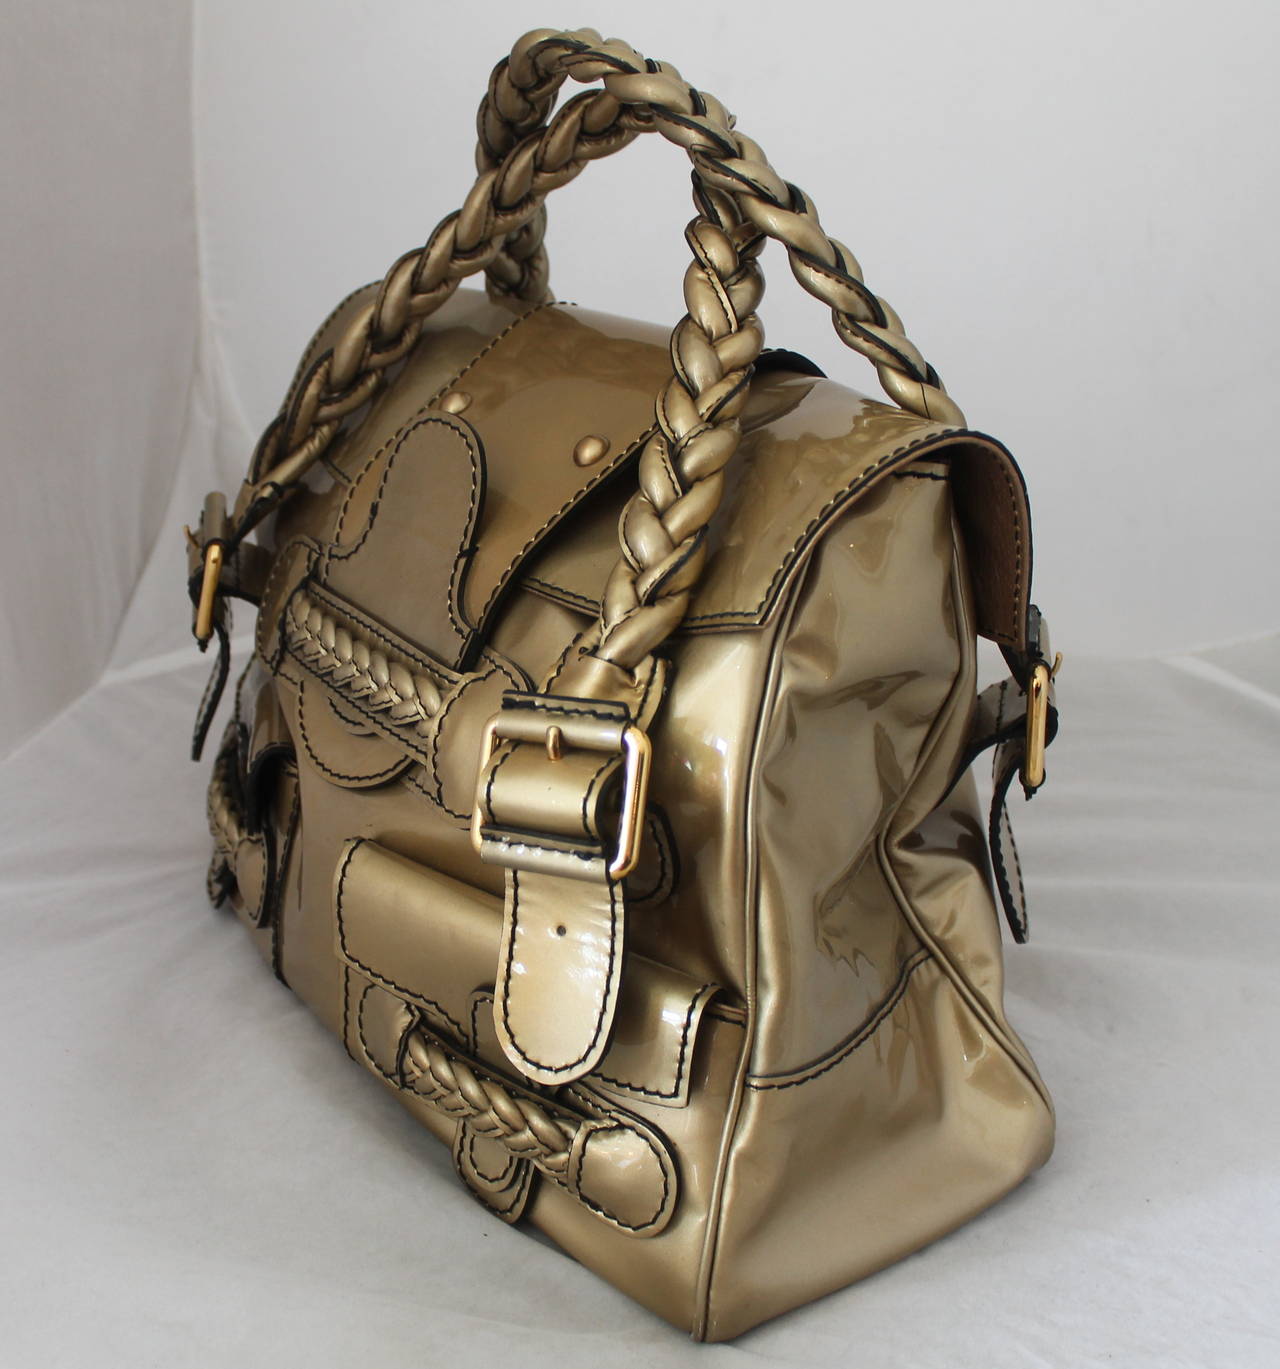 Valentino Gold Patent Leather Handbag with Braiding - rt. $1795. This bag is in excellent condition with no visible signs of wear. 

Measurements:
Length- 11